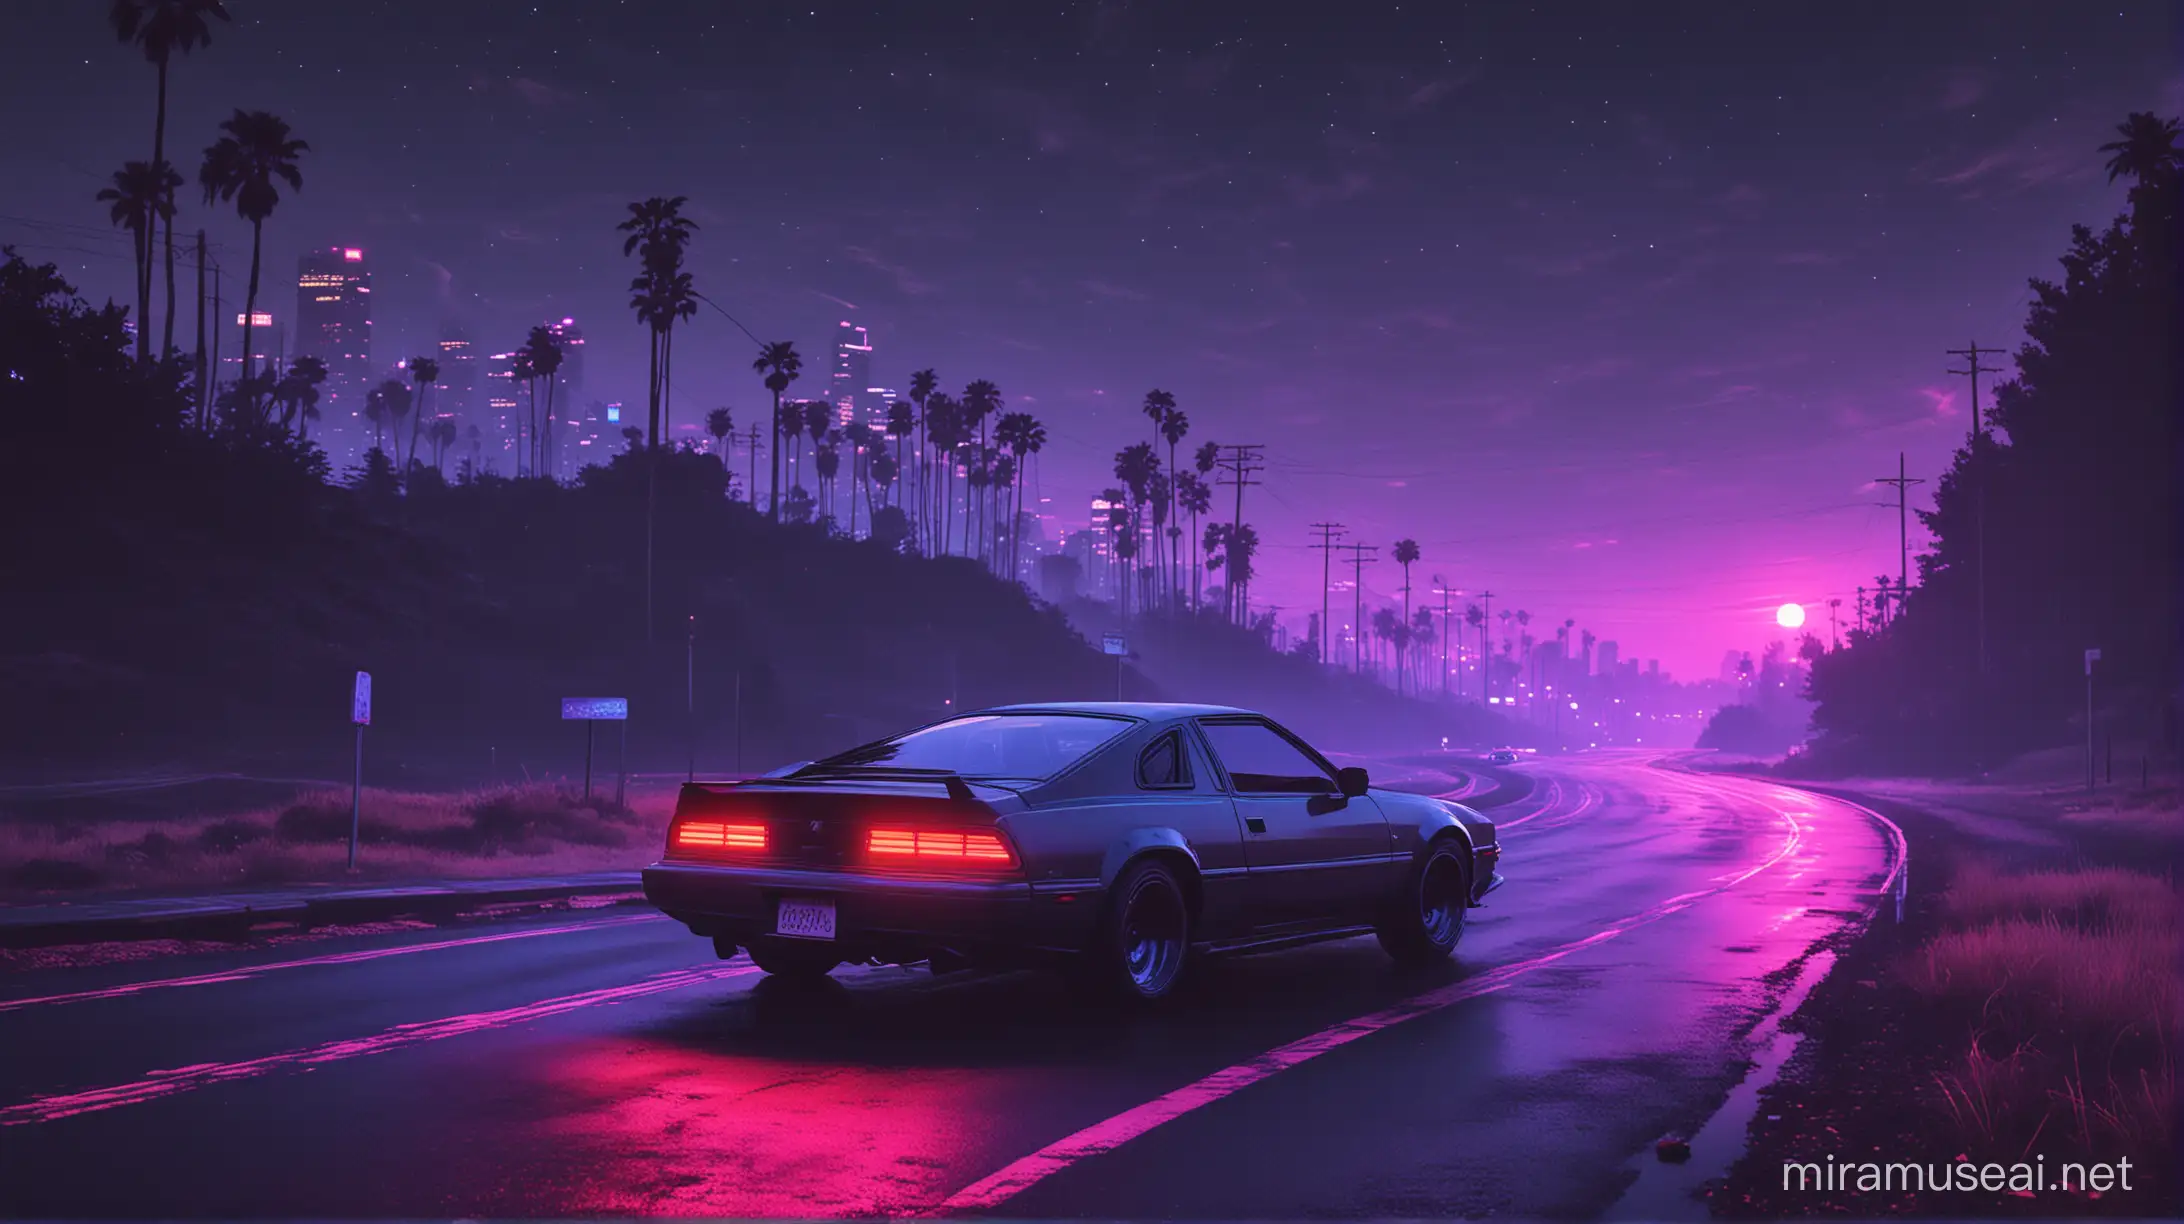 synthwave driveway
highway
abandonned city
dystopia
night
dark
synthwave car